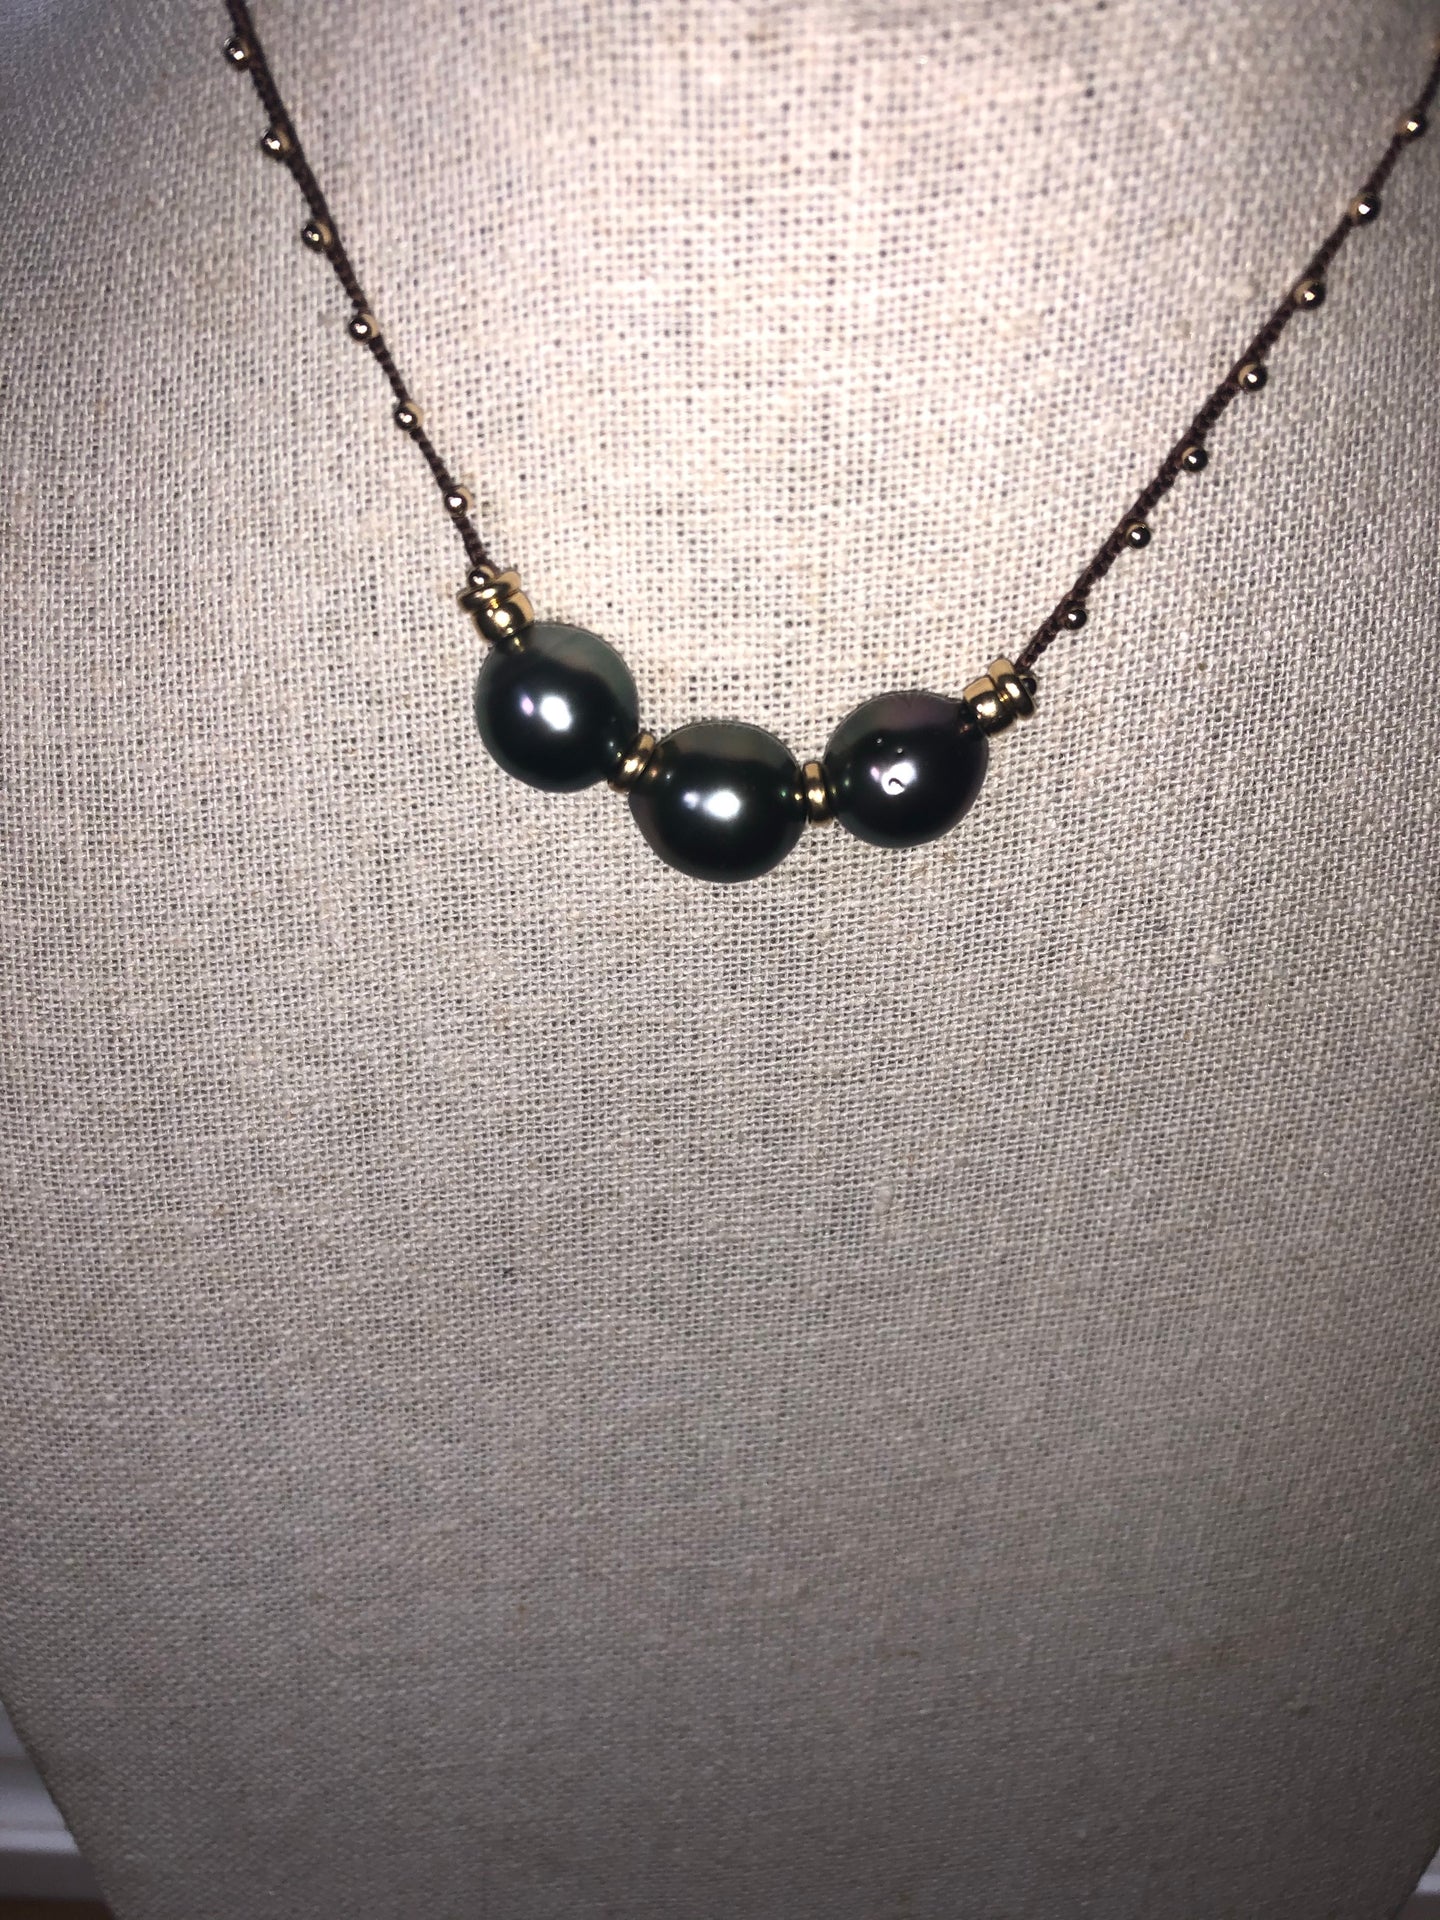 Triple Tahitian Pearl Necklace with gold filled beads